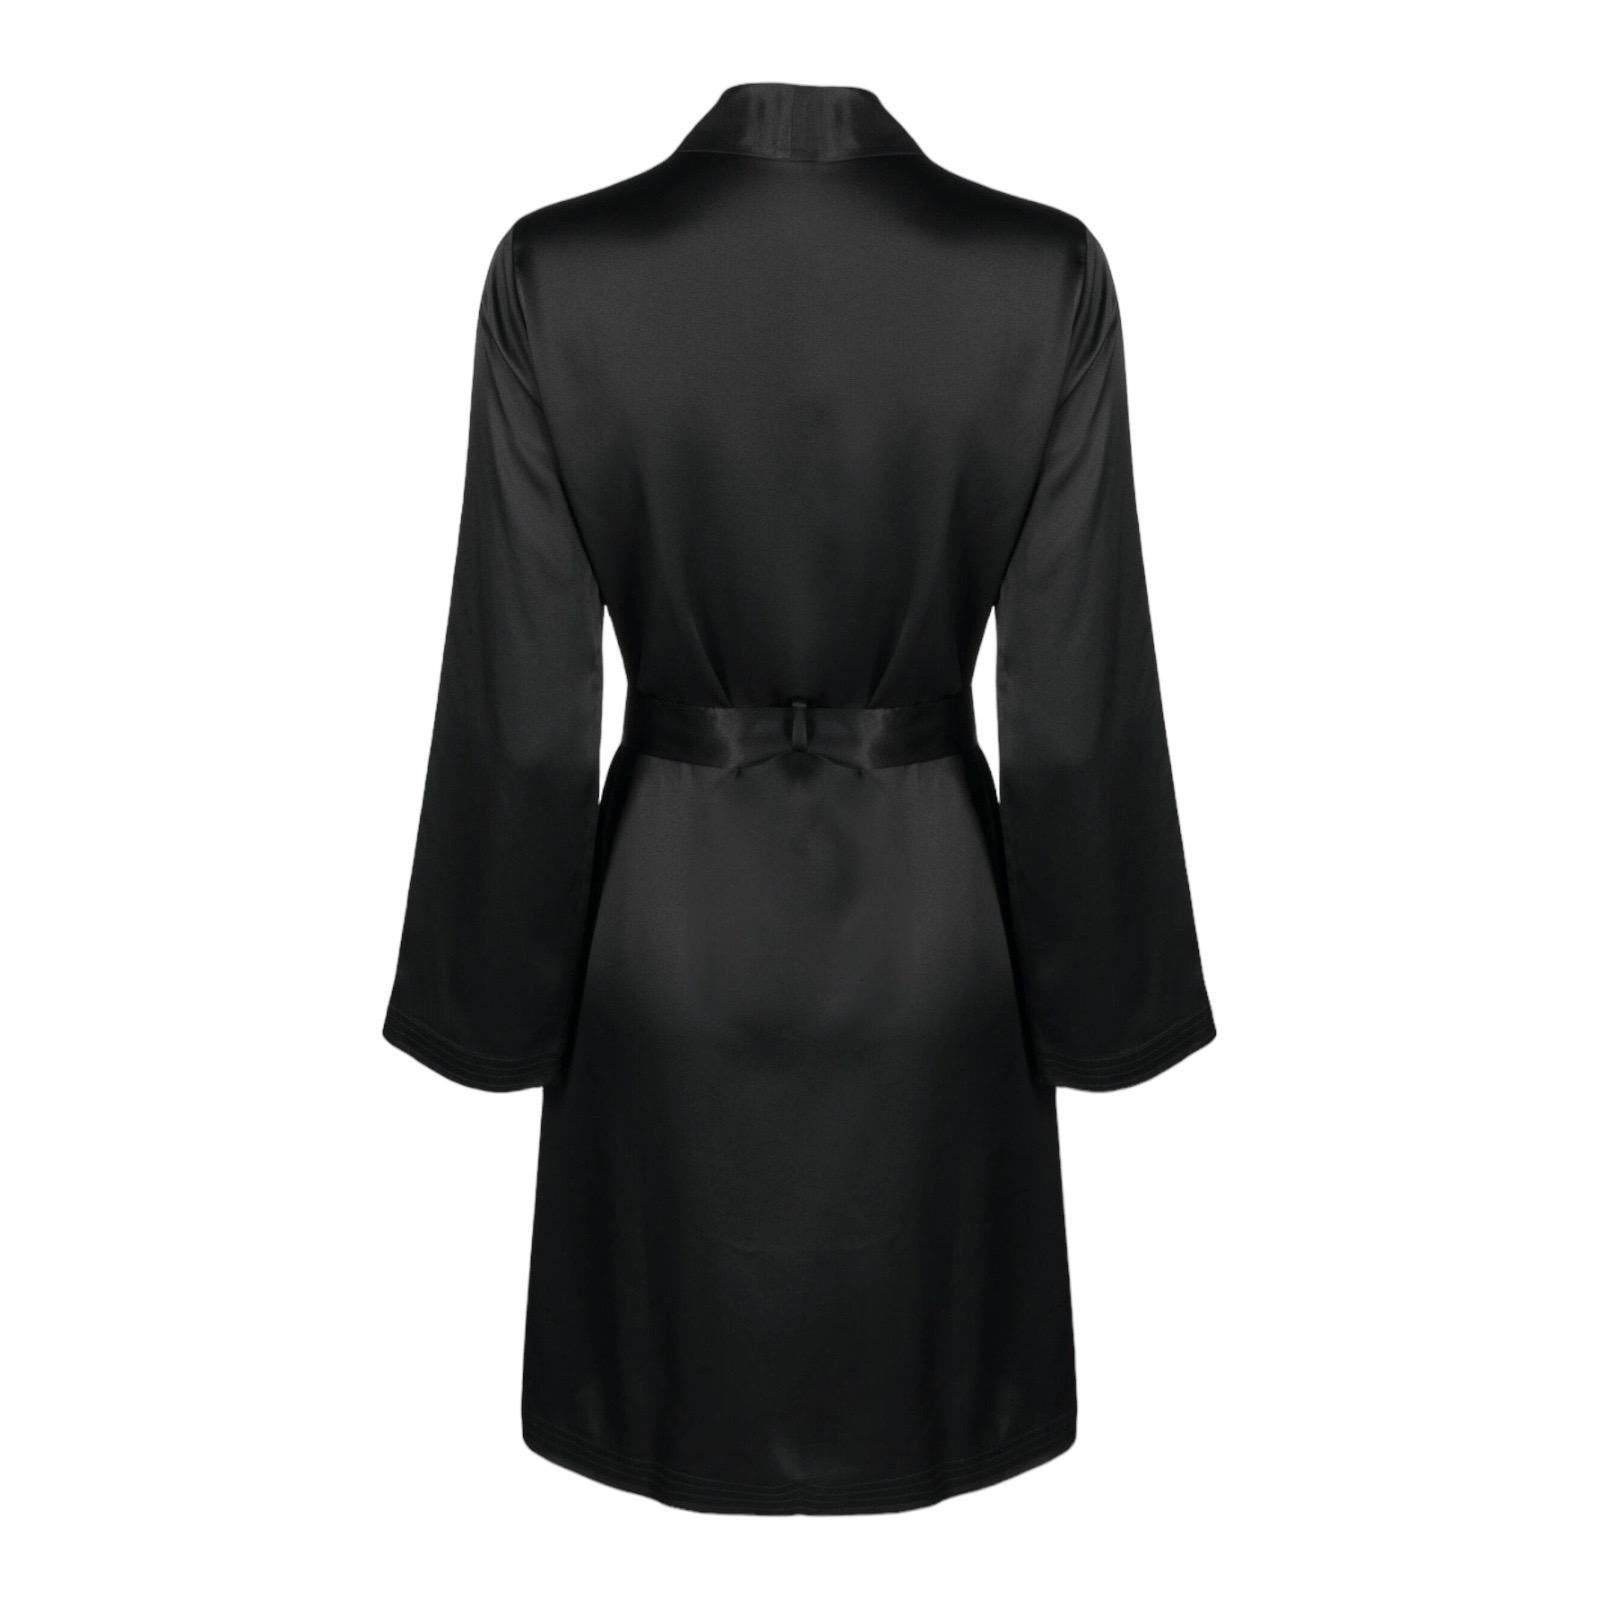 NEW La Perla Black Silk Belted Robe


• 100% silk
• Comes with matching belt
• Dry clean only
• Size S
• New with tags & extra button



AD picture for style reference only